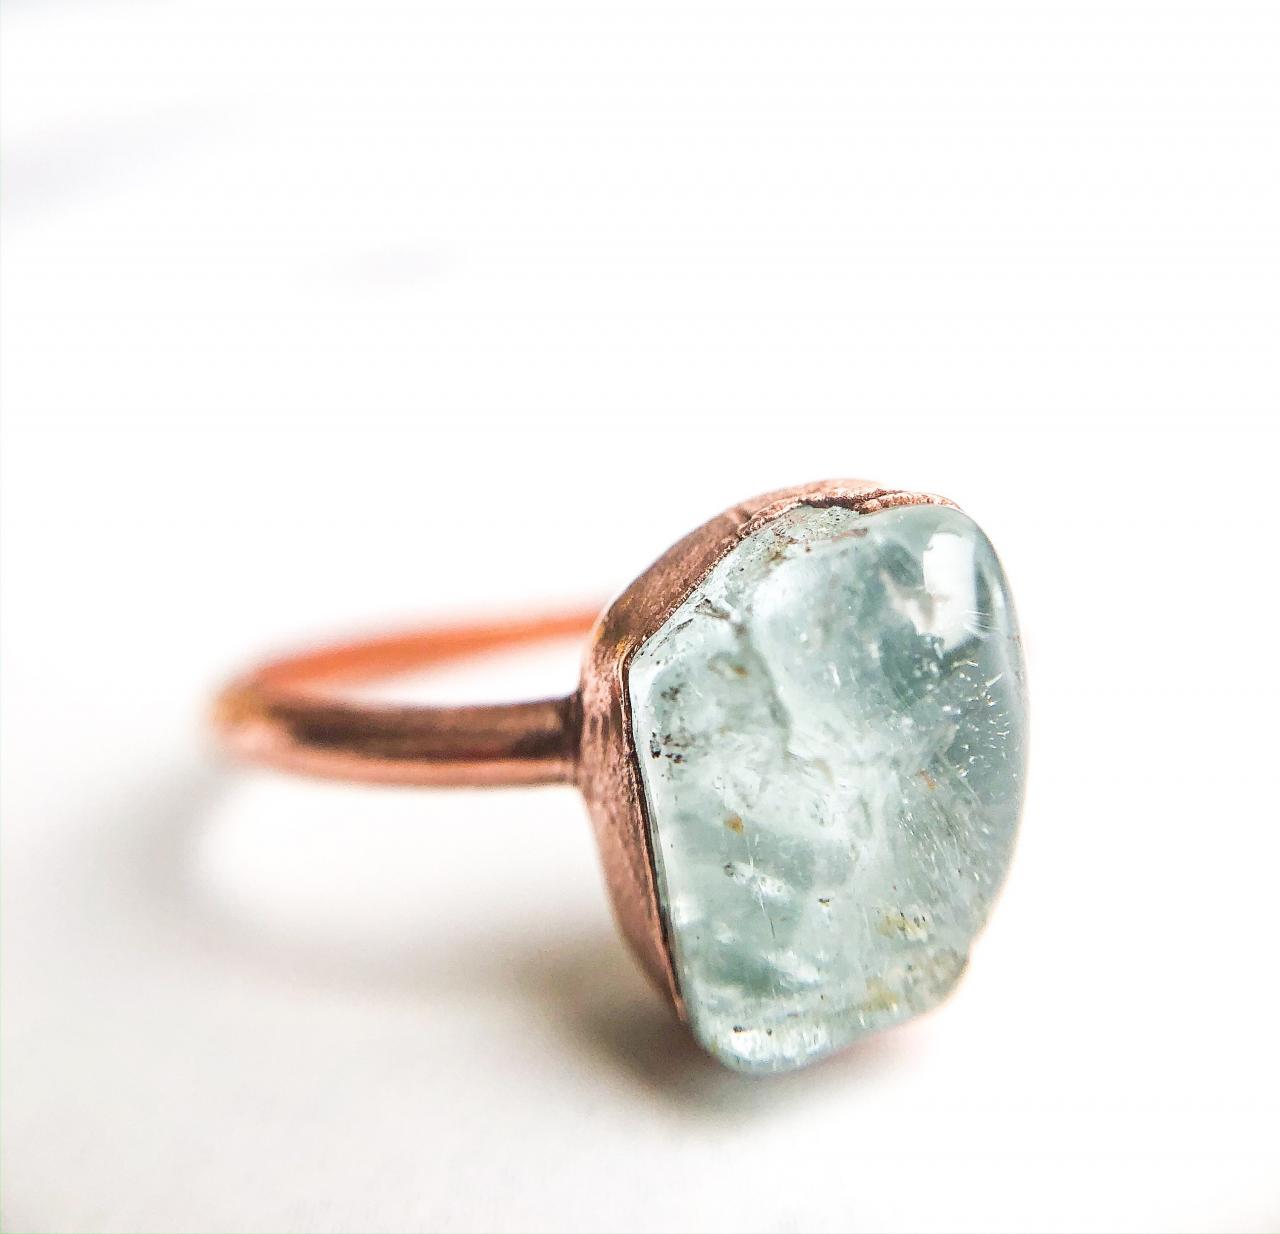 Raw Topaz Ring, Silver, Gold, Rose Gold, Or Copper Rings, December Birthstone Jewelry